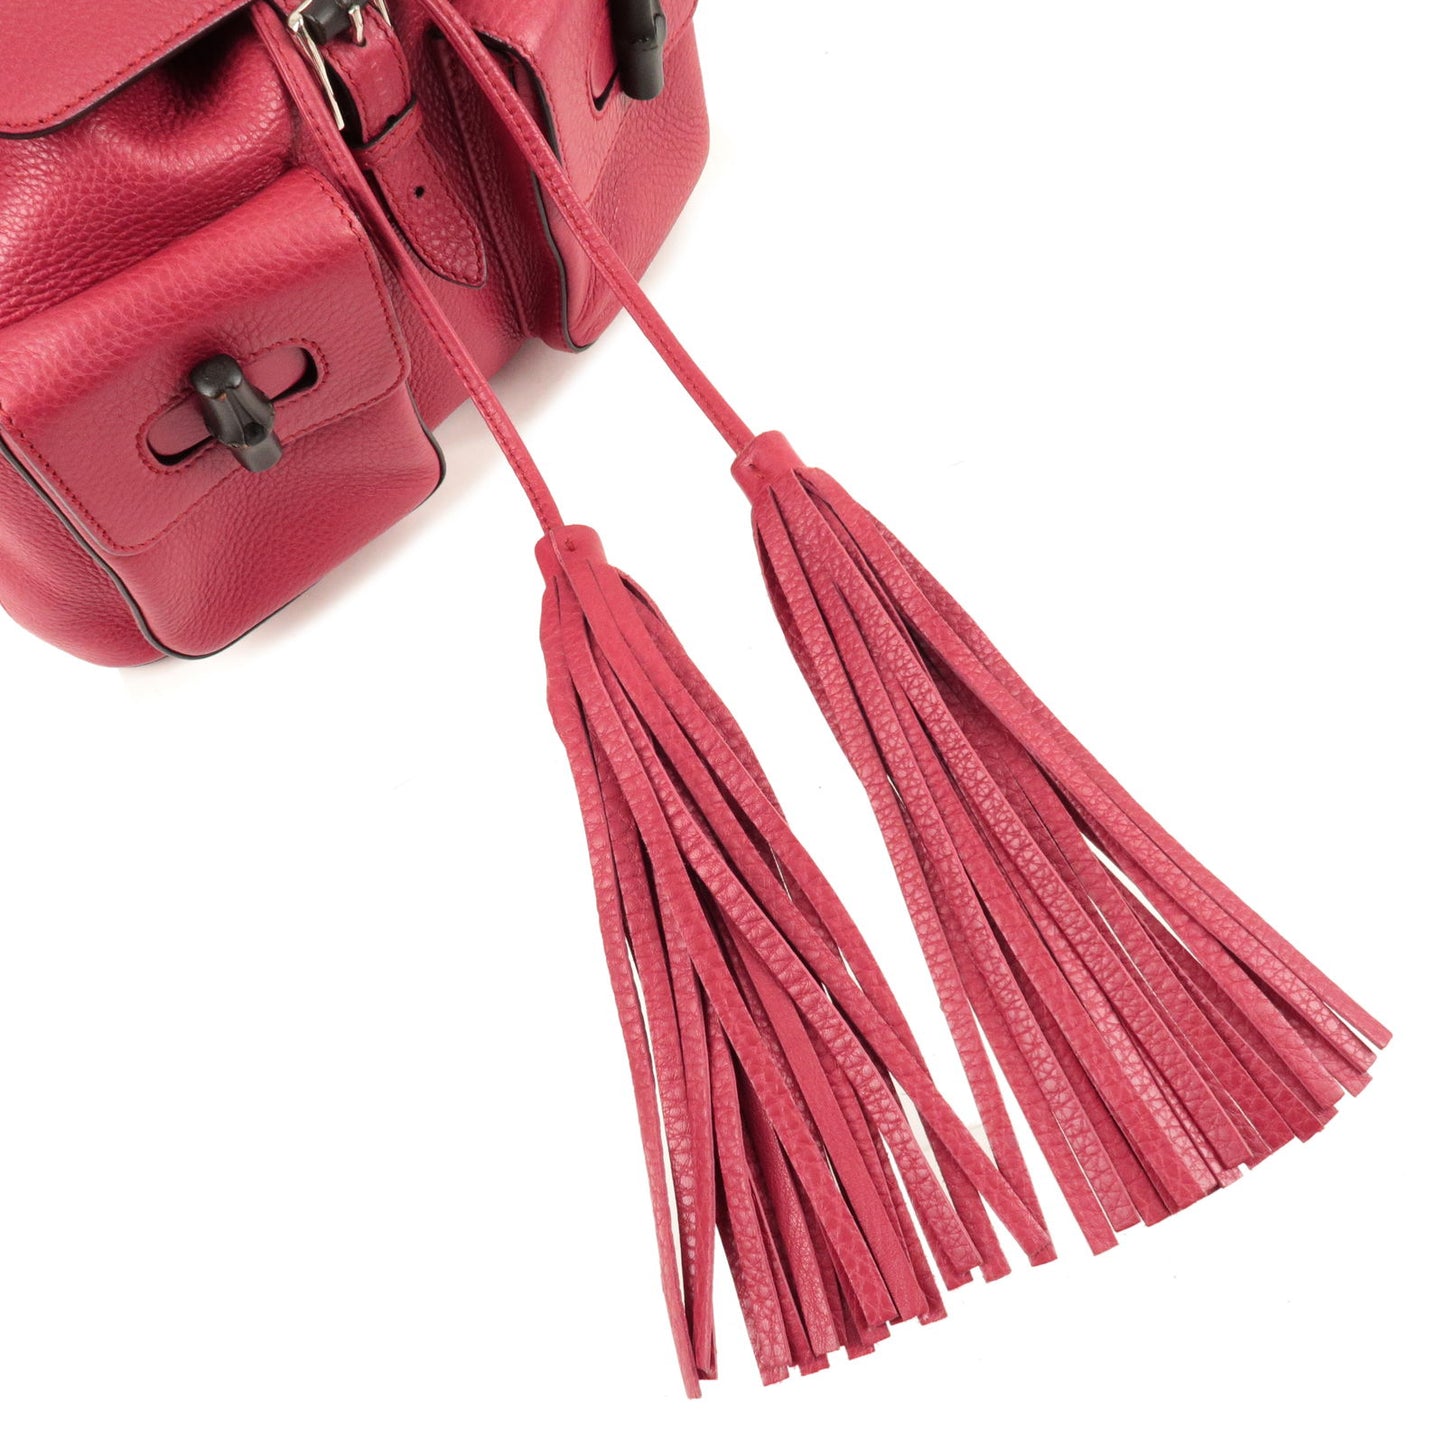 GUCCI Bamboo Back Pack With Fringe Leather Pink 370833